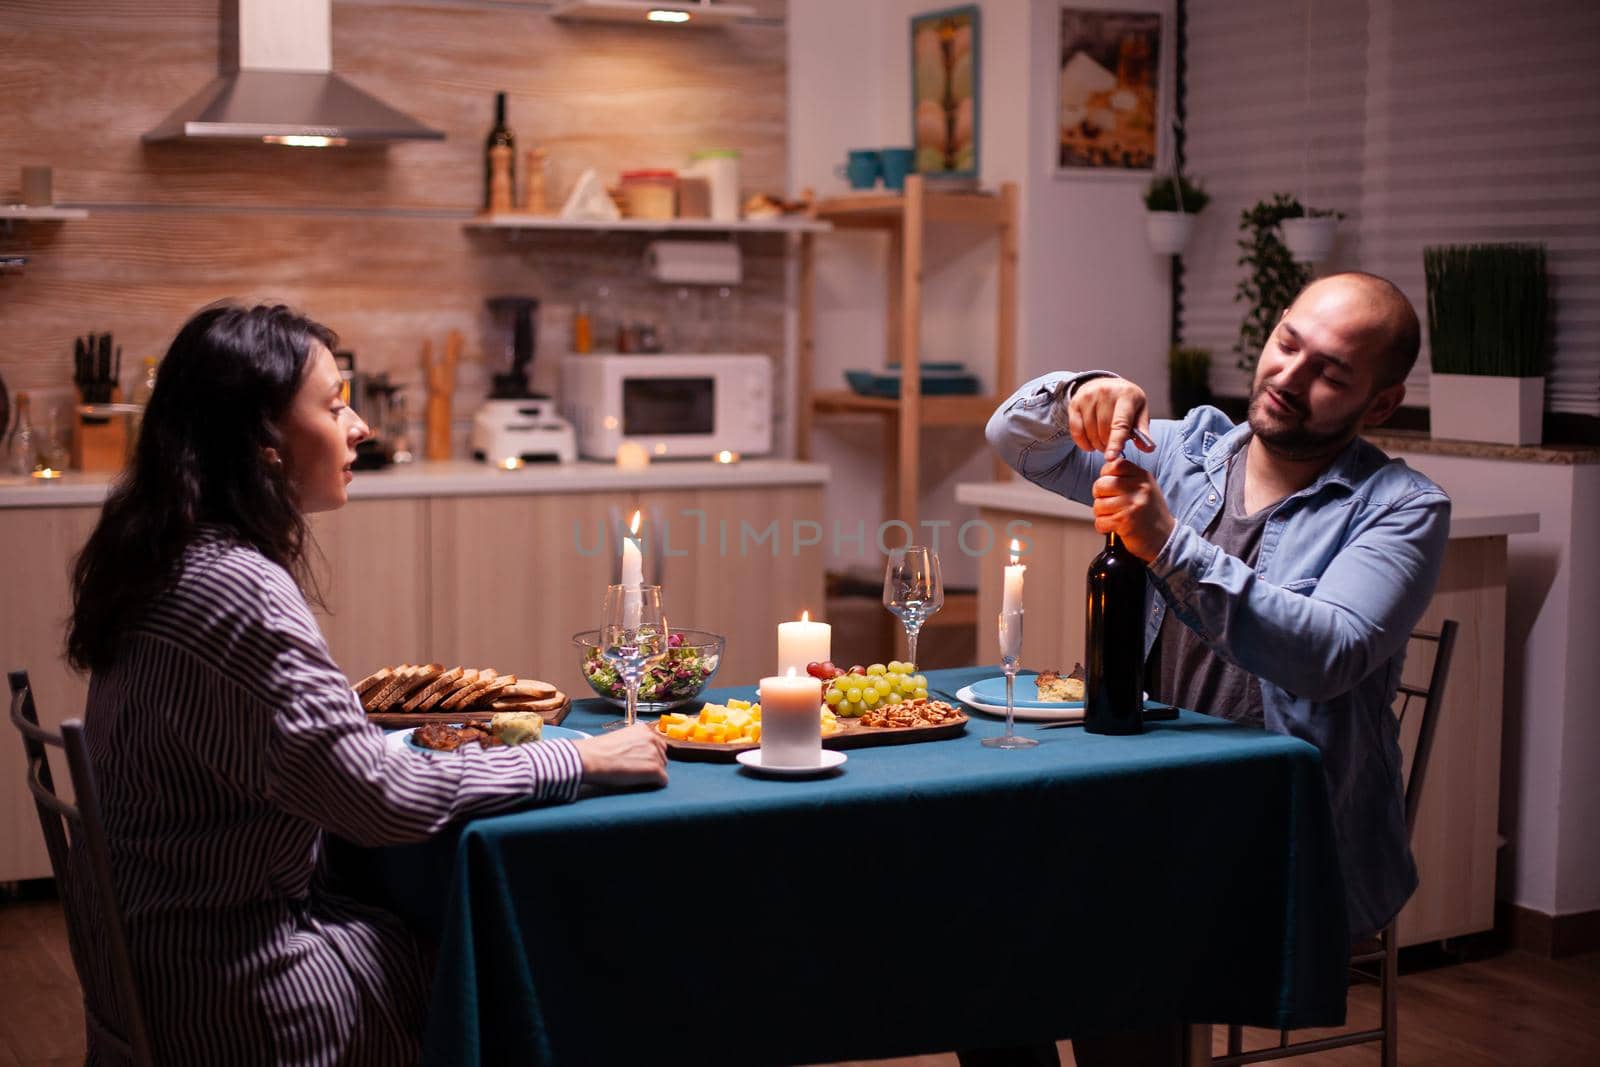 Cheerful husband opening a bottle of wine during romantic dinner with wife in kitchen. Happy couple talking, sitting at table in kitchen, enjoying the meal, celebrating their anniversary .